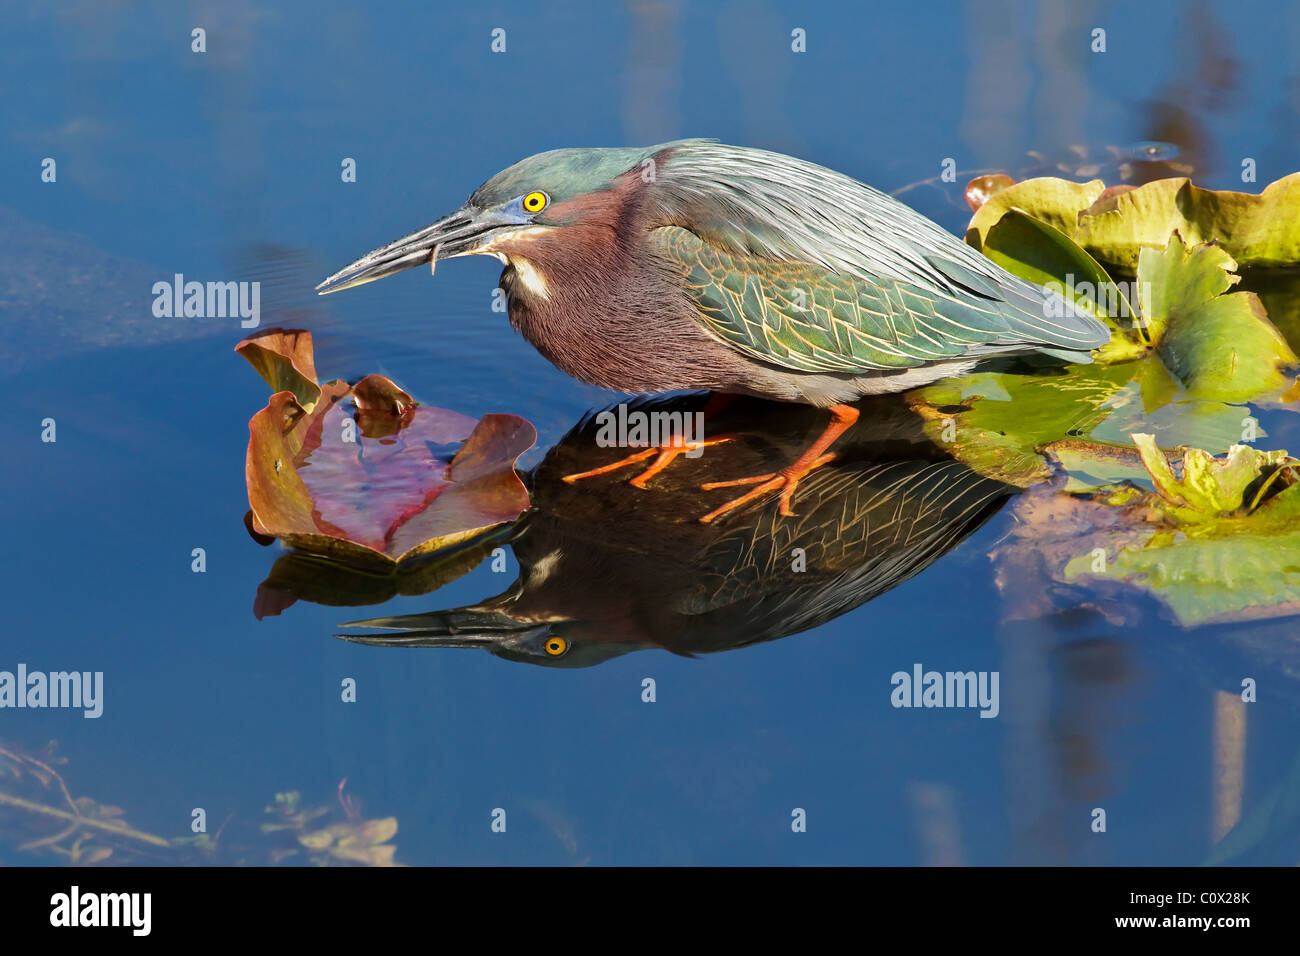 An adult Green Heron standing and fishing Stock Photo